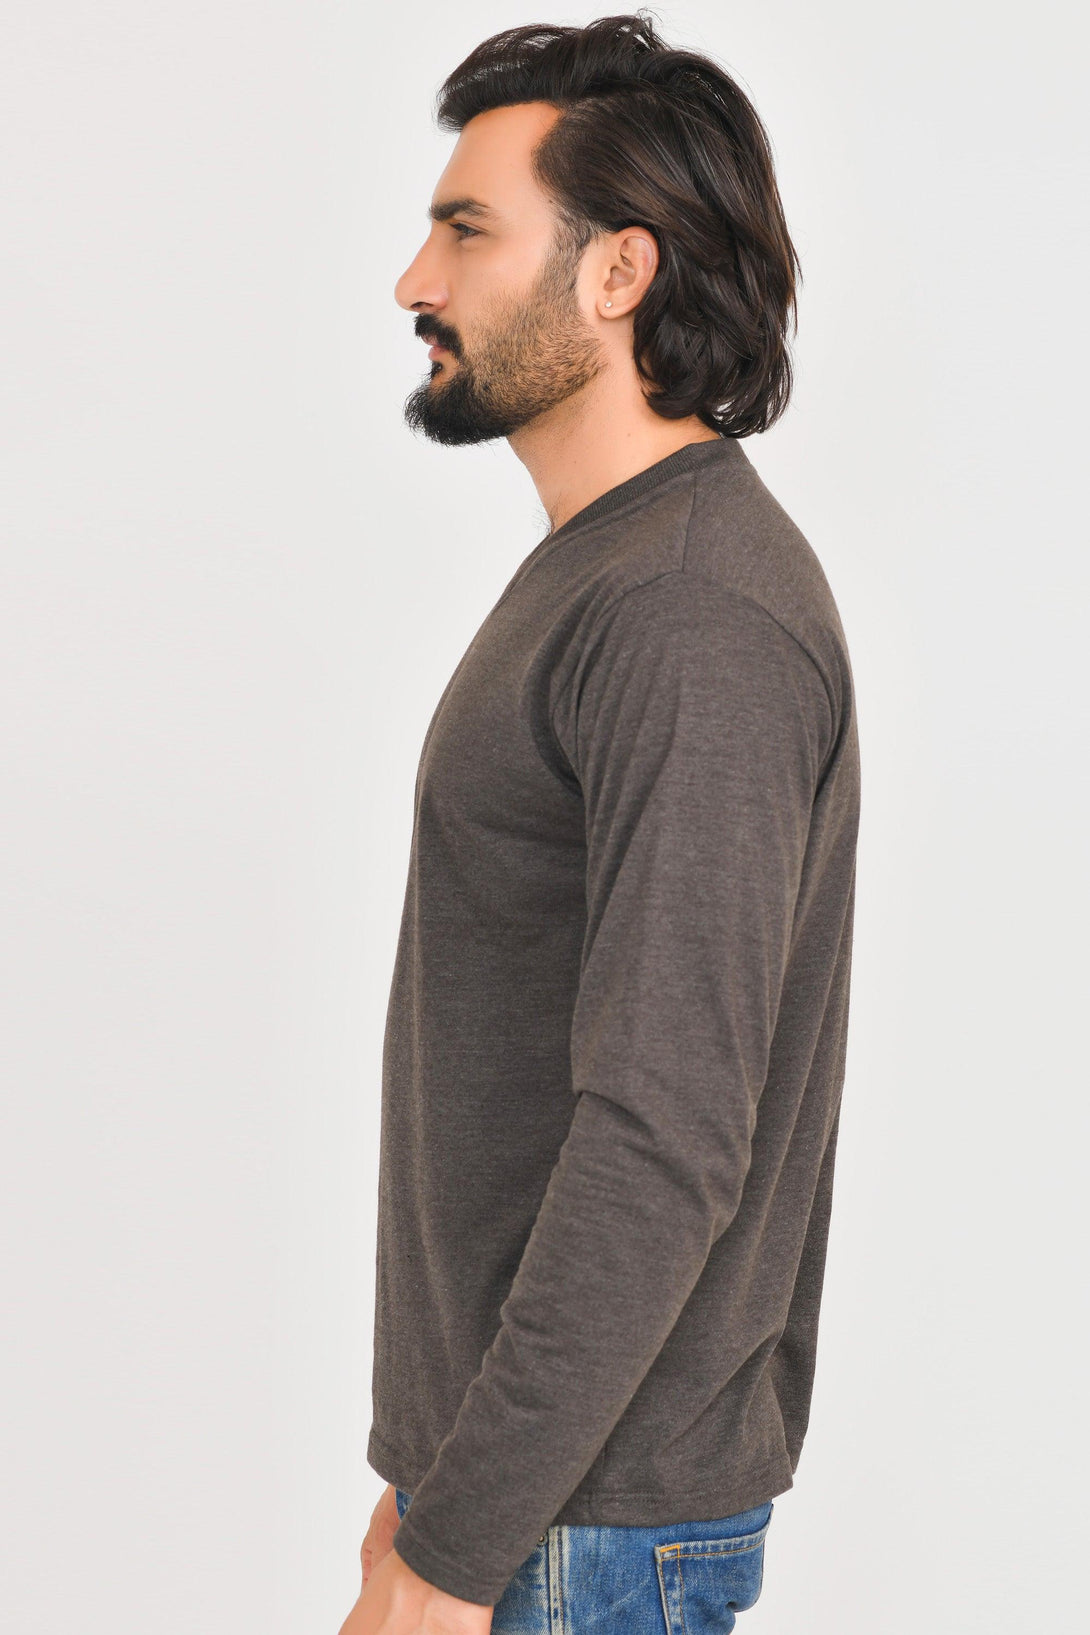 V-Neck Long Sleeve T-Shirts GREY - CHARCOAL - CHOCOLATE - MUSTARD - Pack of 4 - FTS